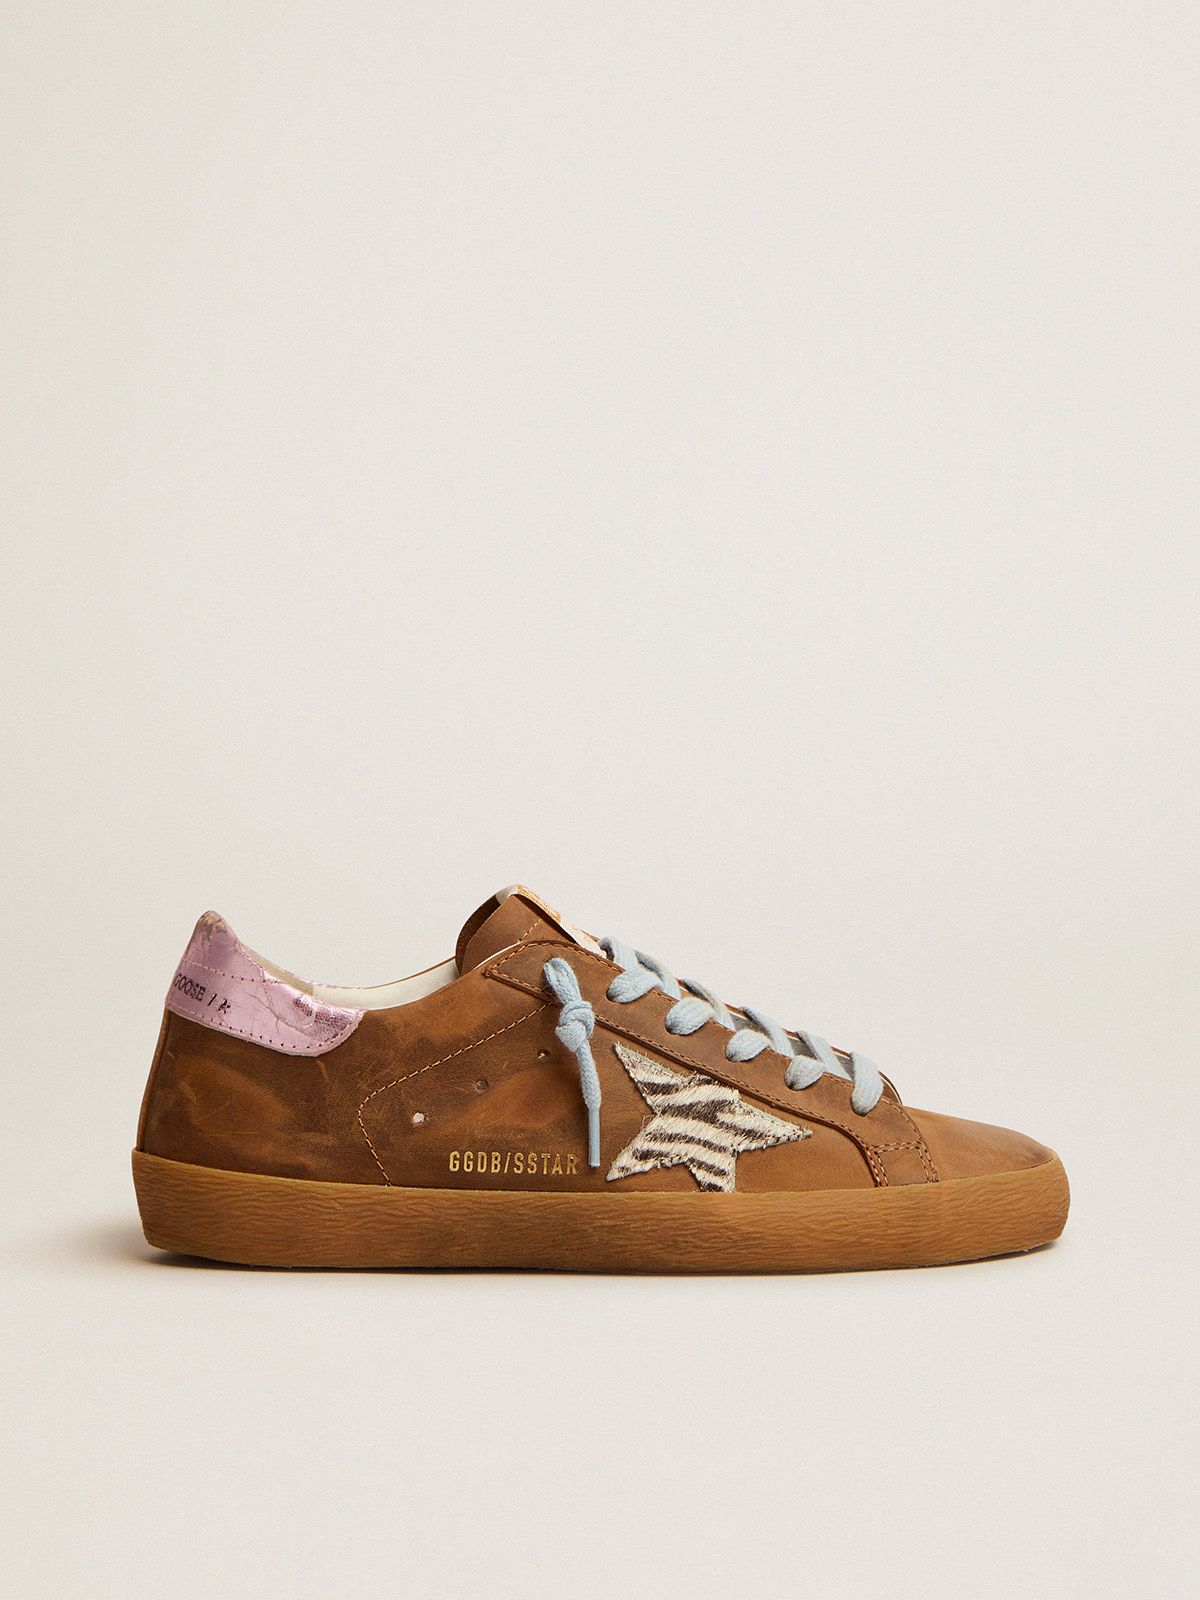 Super-Star sneakers in brown waxed suede with a zebra-print pony skin star